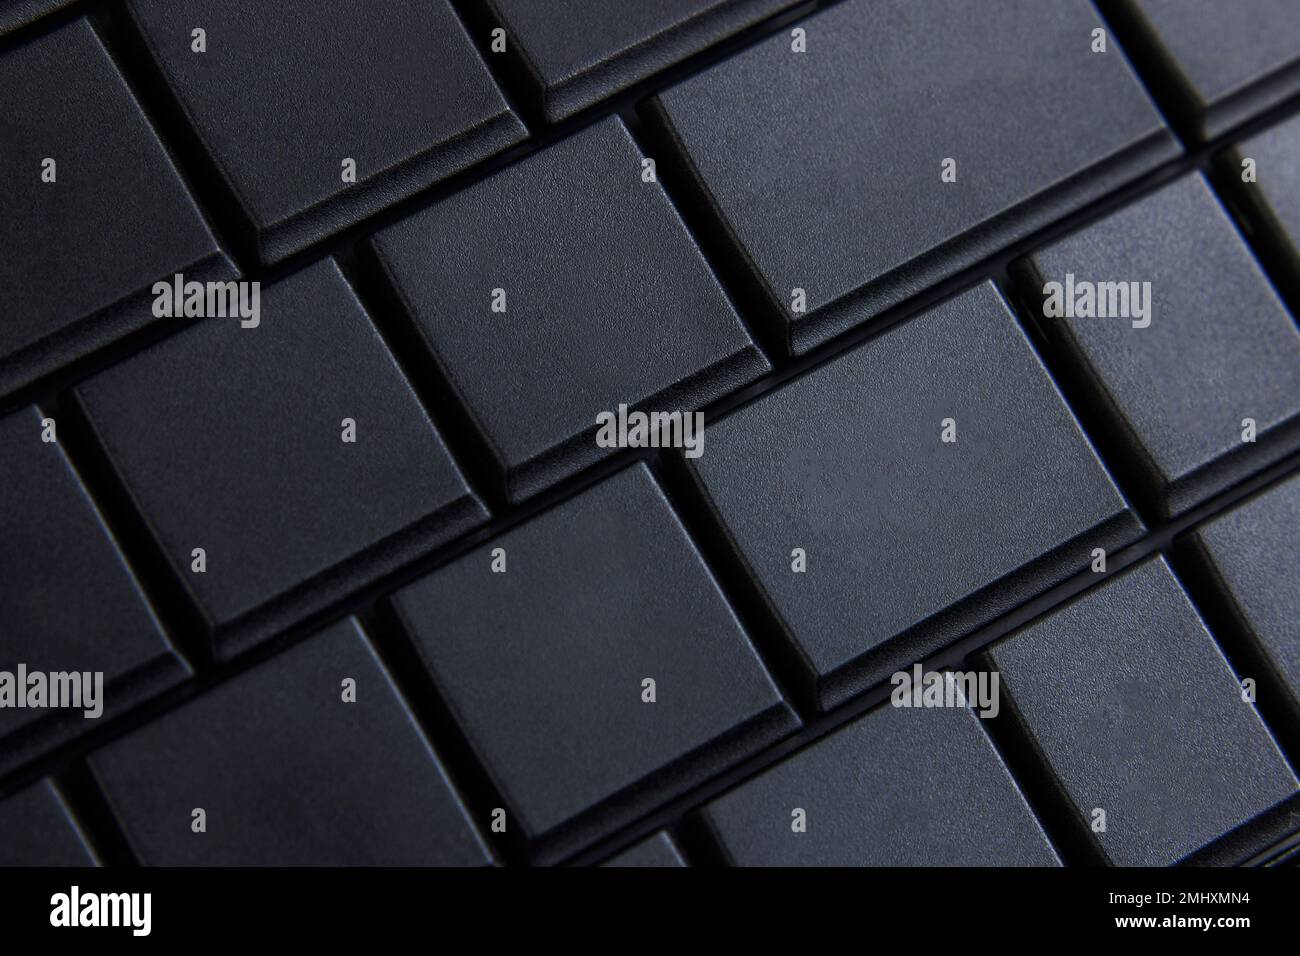 Black computer keyboard, macro photo, selective focus. Place for text on keyboard button. Stock Photo